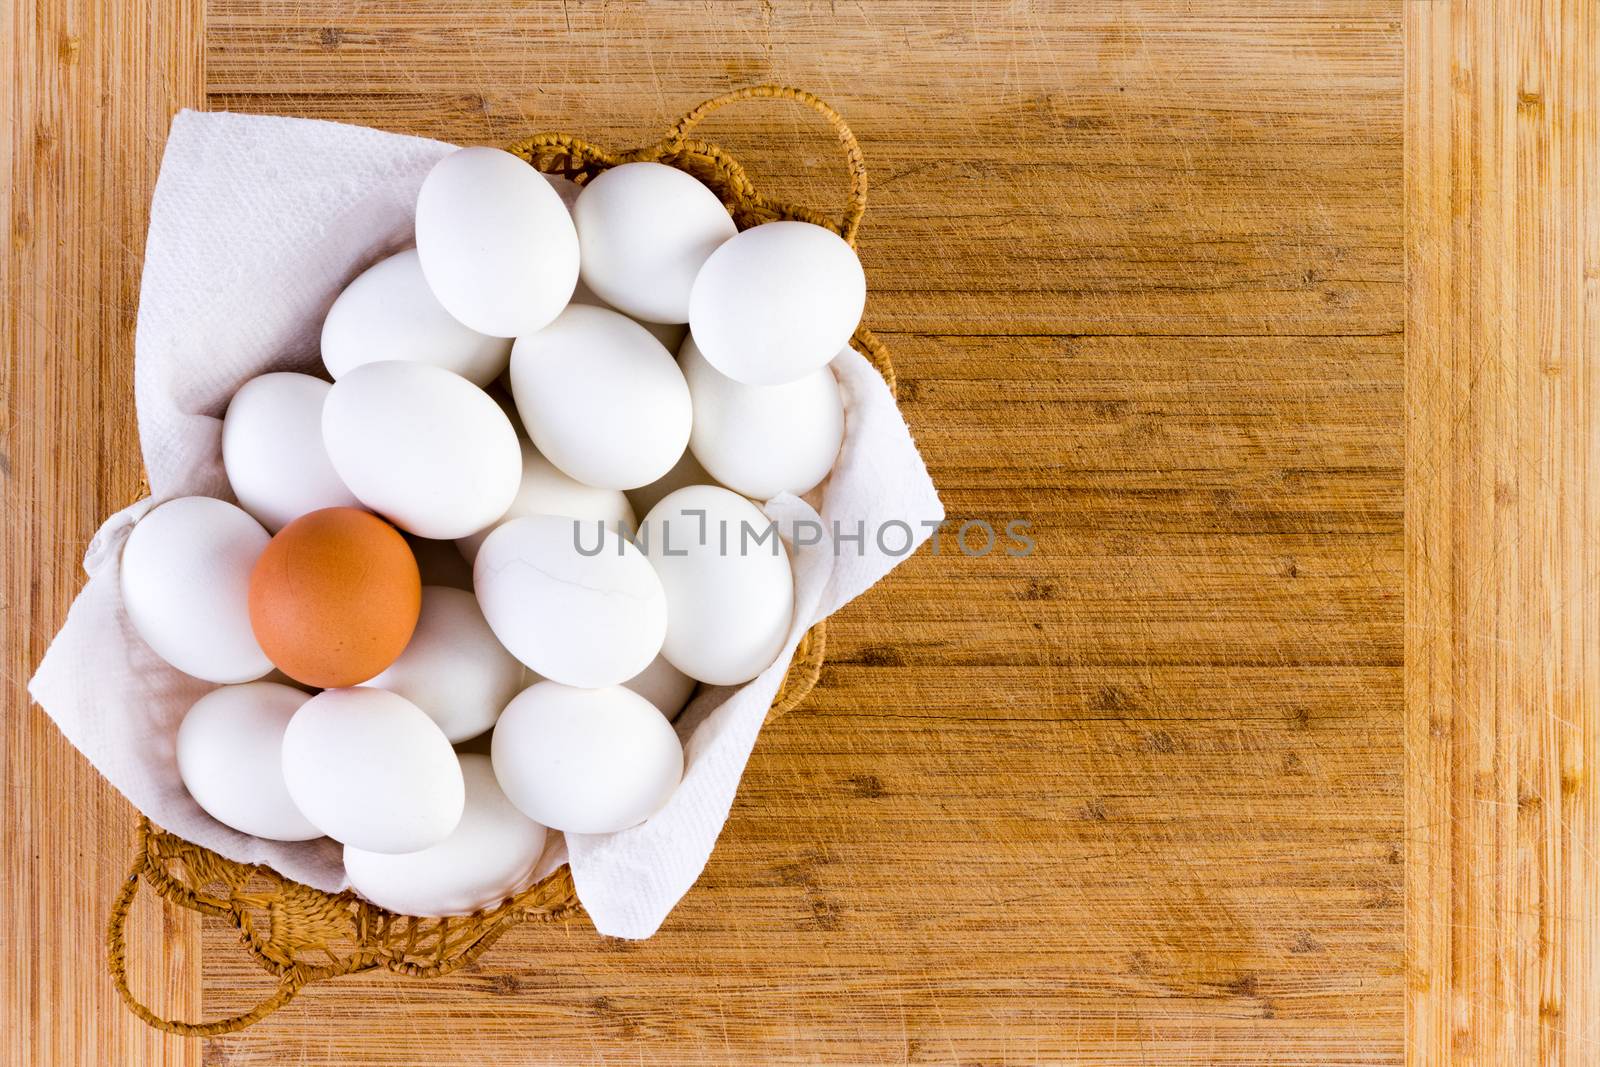 Single wicker filled with single brown egg on top of white ones over wooden table background with copy space